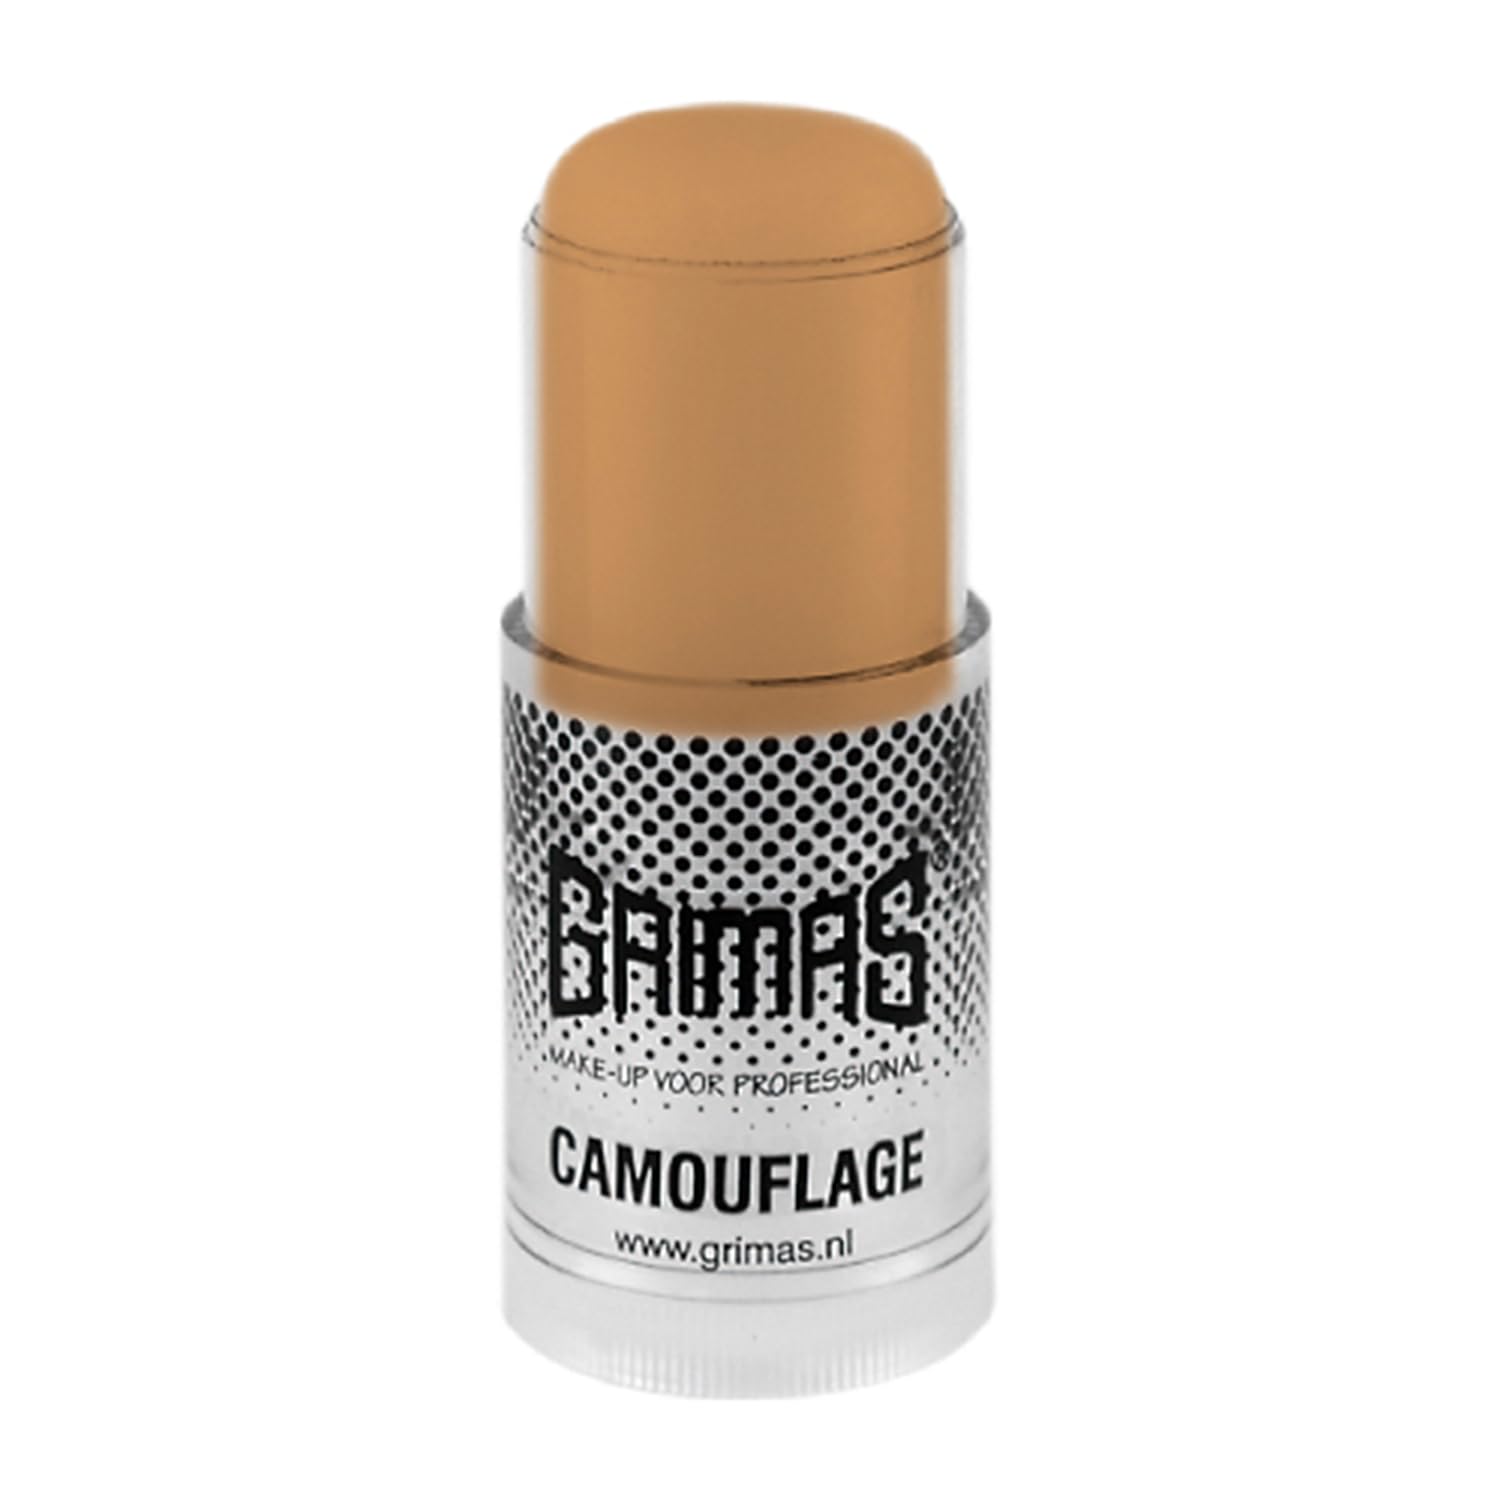 GRIMAS Professional Concealer Camouflage Stick, 23 ml, Skin Colour B2, Professional High Coverage and Concealing Makeup for Tattoos, Fire Paints, Dark Circles, Pigment Spots and Much More